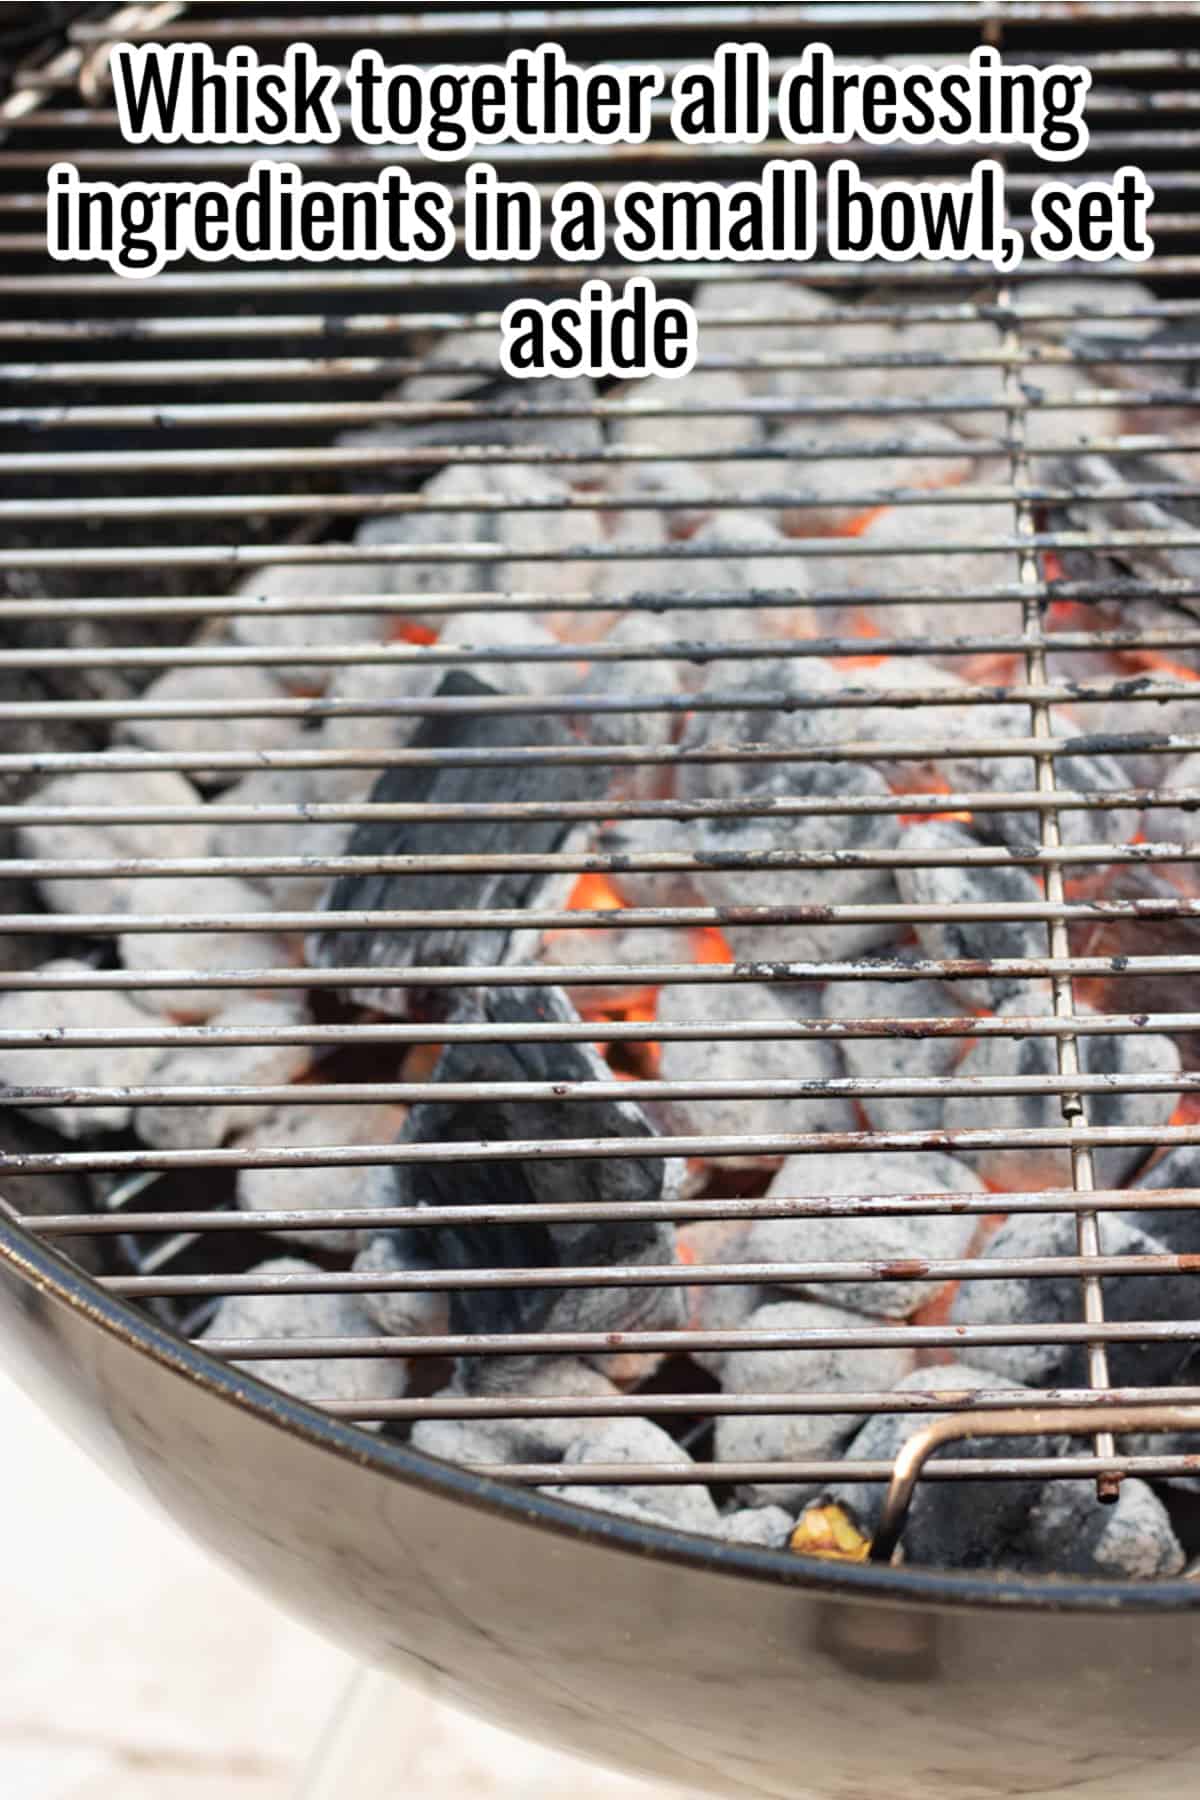 charcoal grill with coals and text overlay to explain.